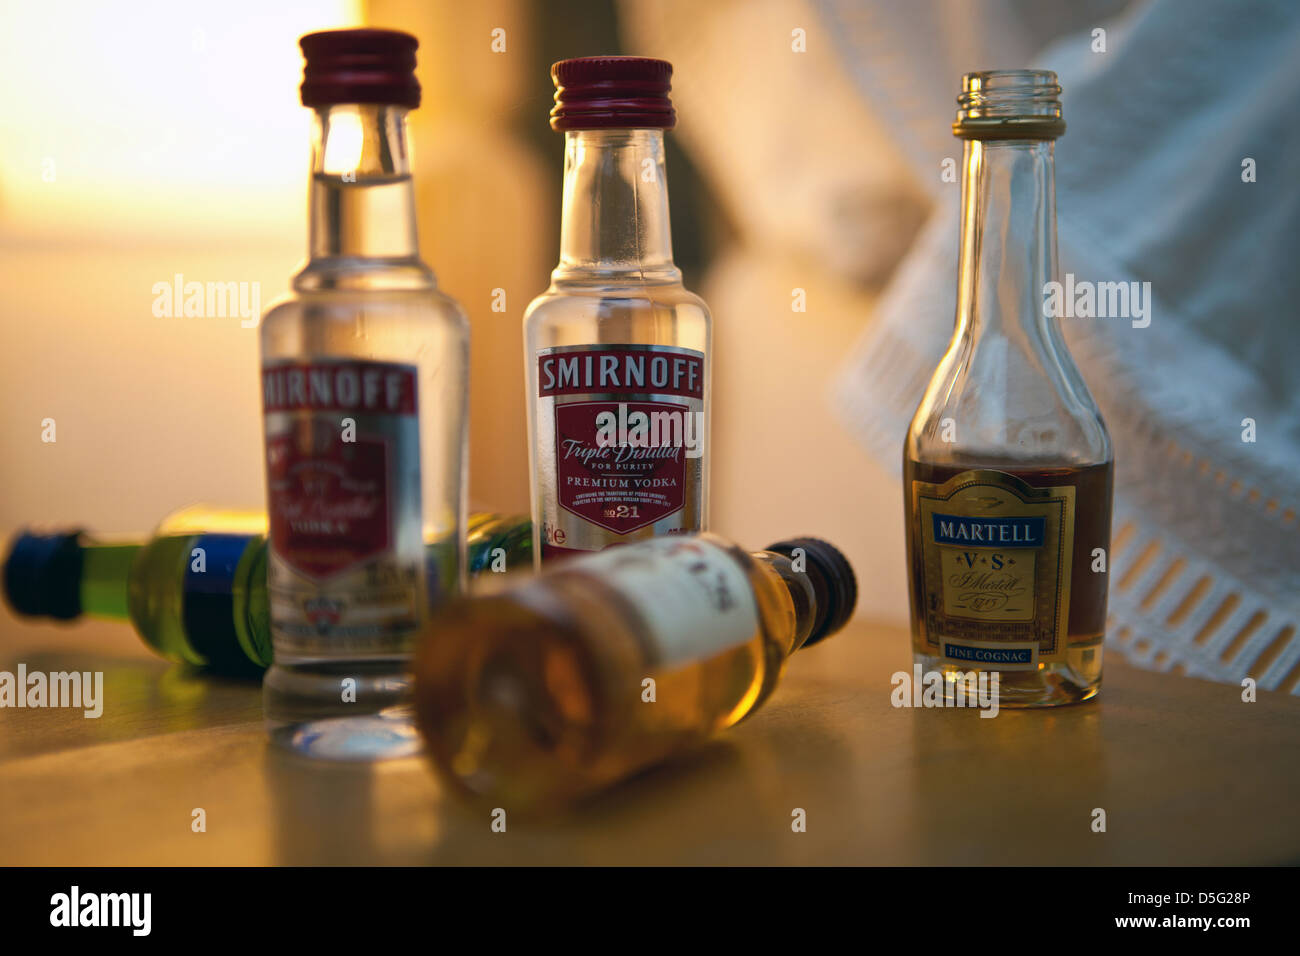 Miniature bottles of alcoholic drinks from hotel mini-bar on bedside table Stock Photo